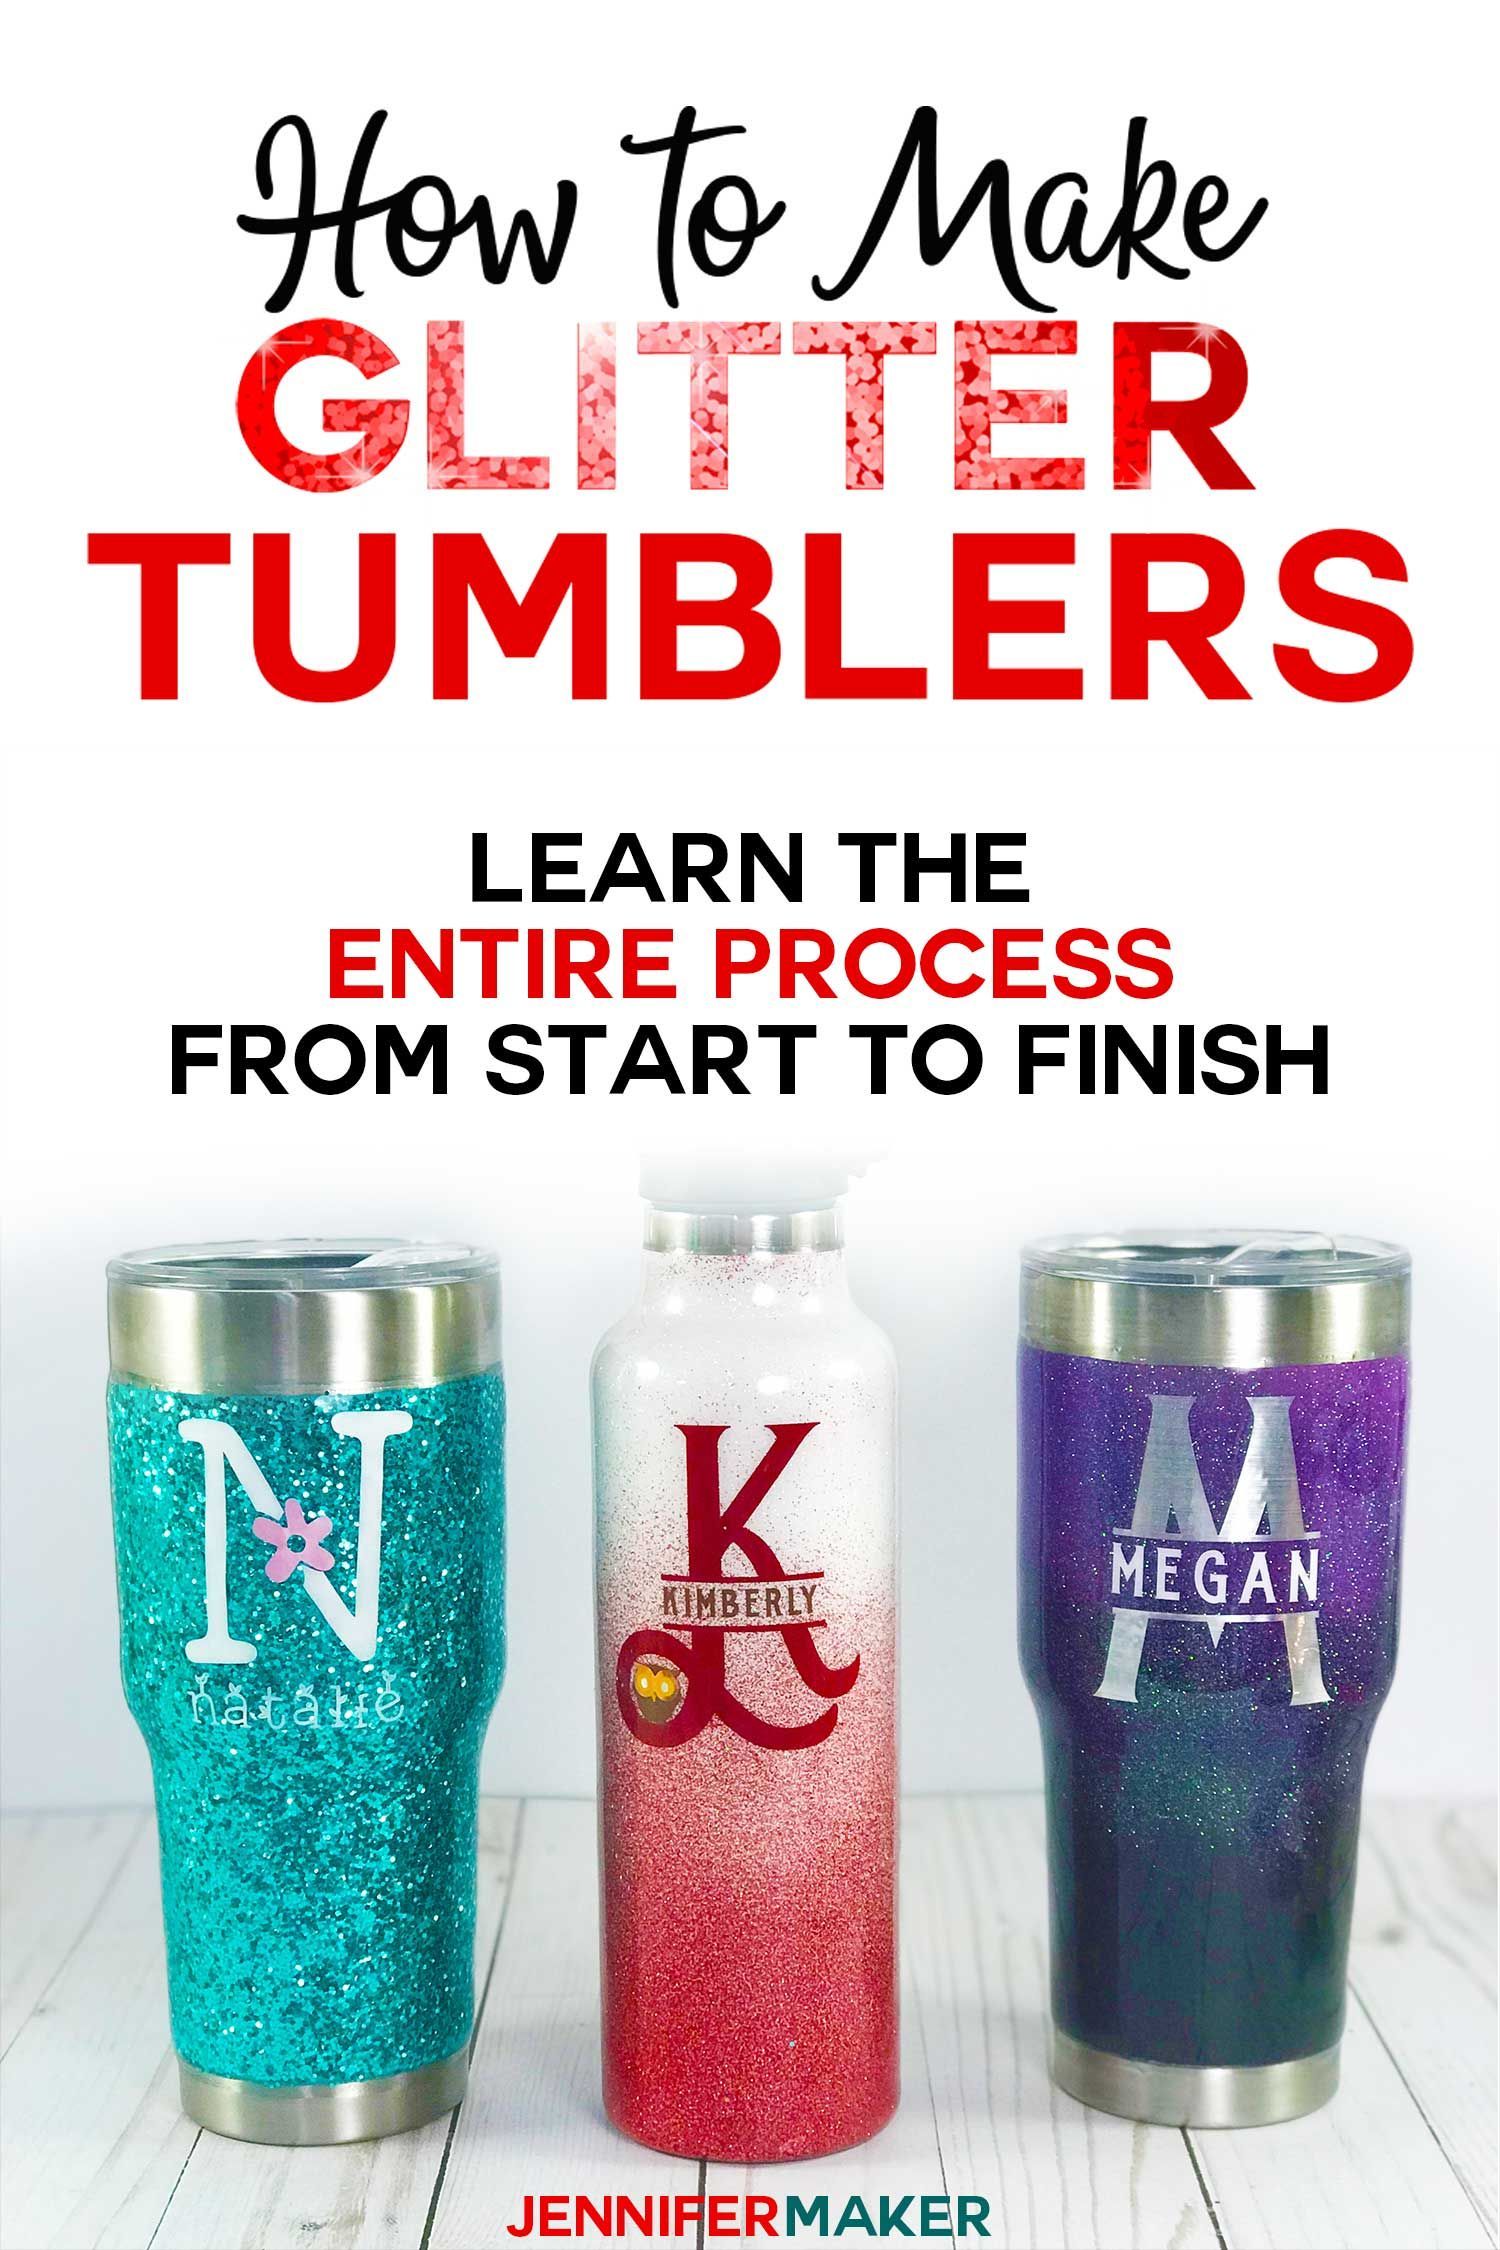 DIY Glitter Tumblers - Step-by-Step Photos & Video Tutorial -   18 diy projects For Gifts creative ideas